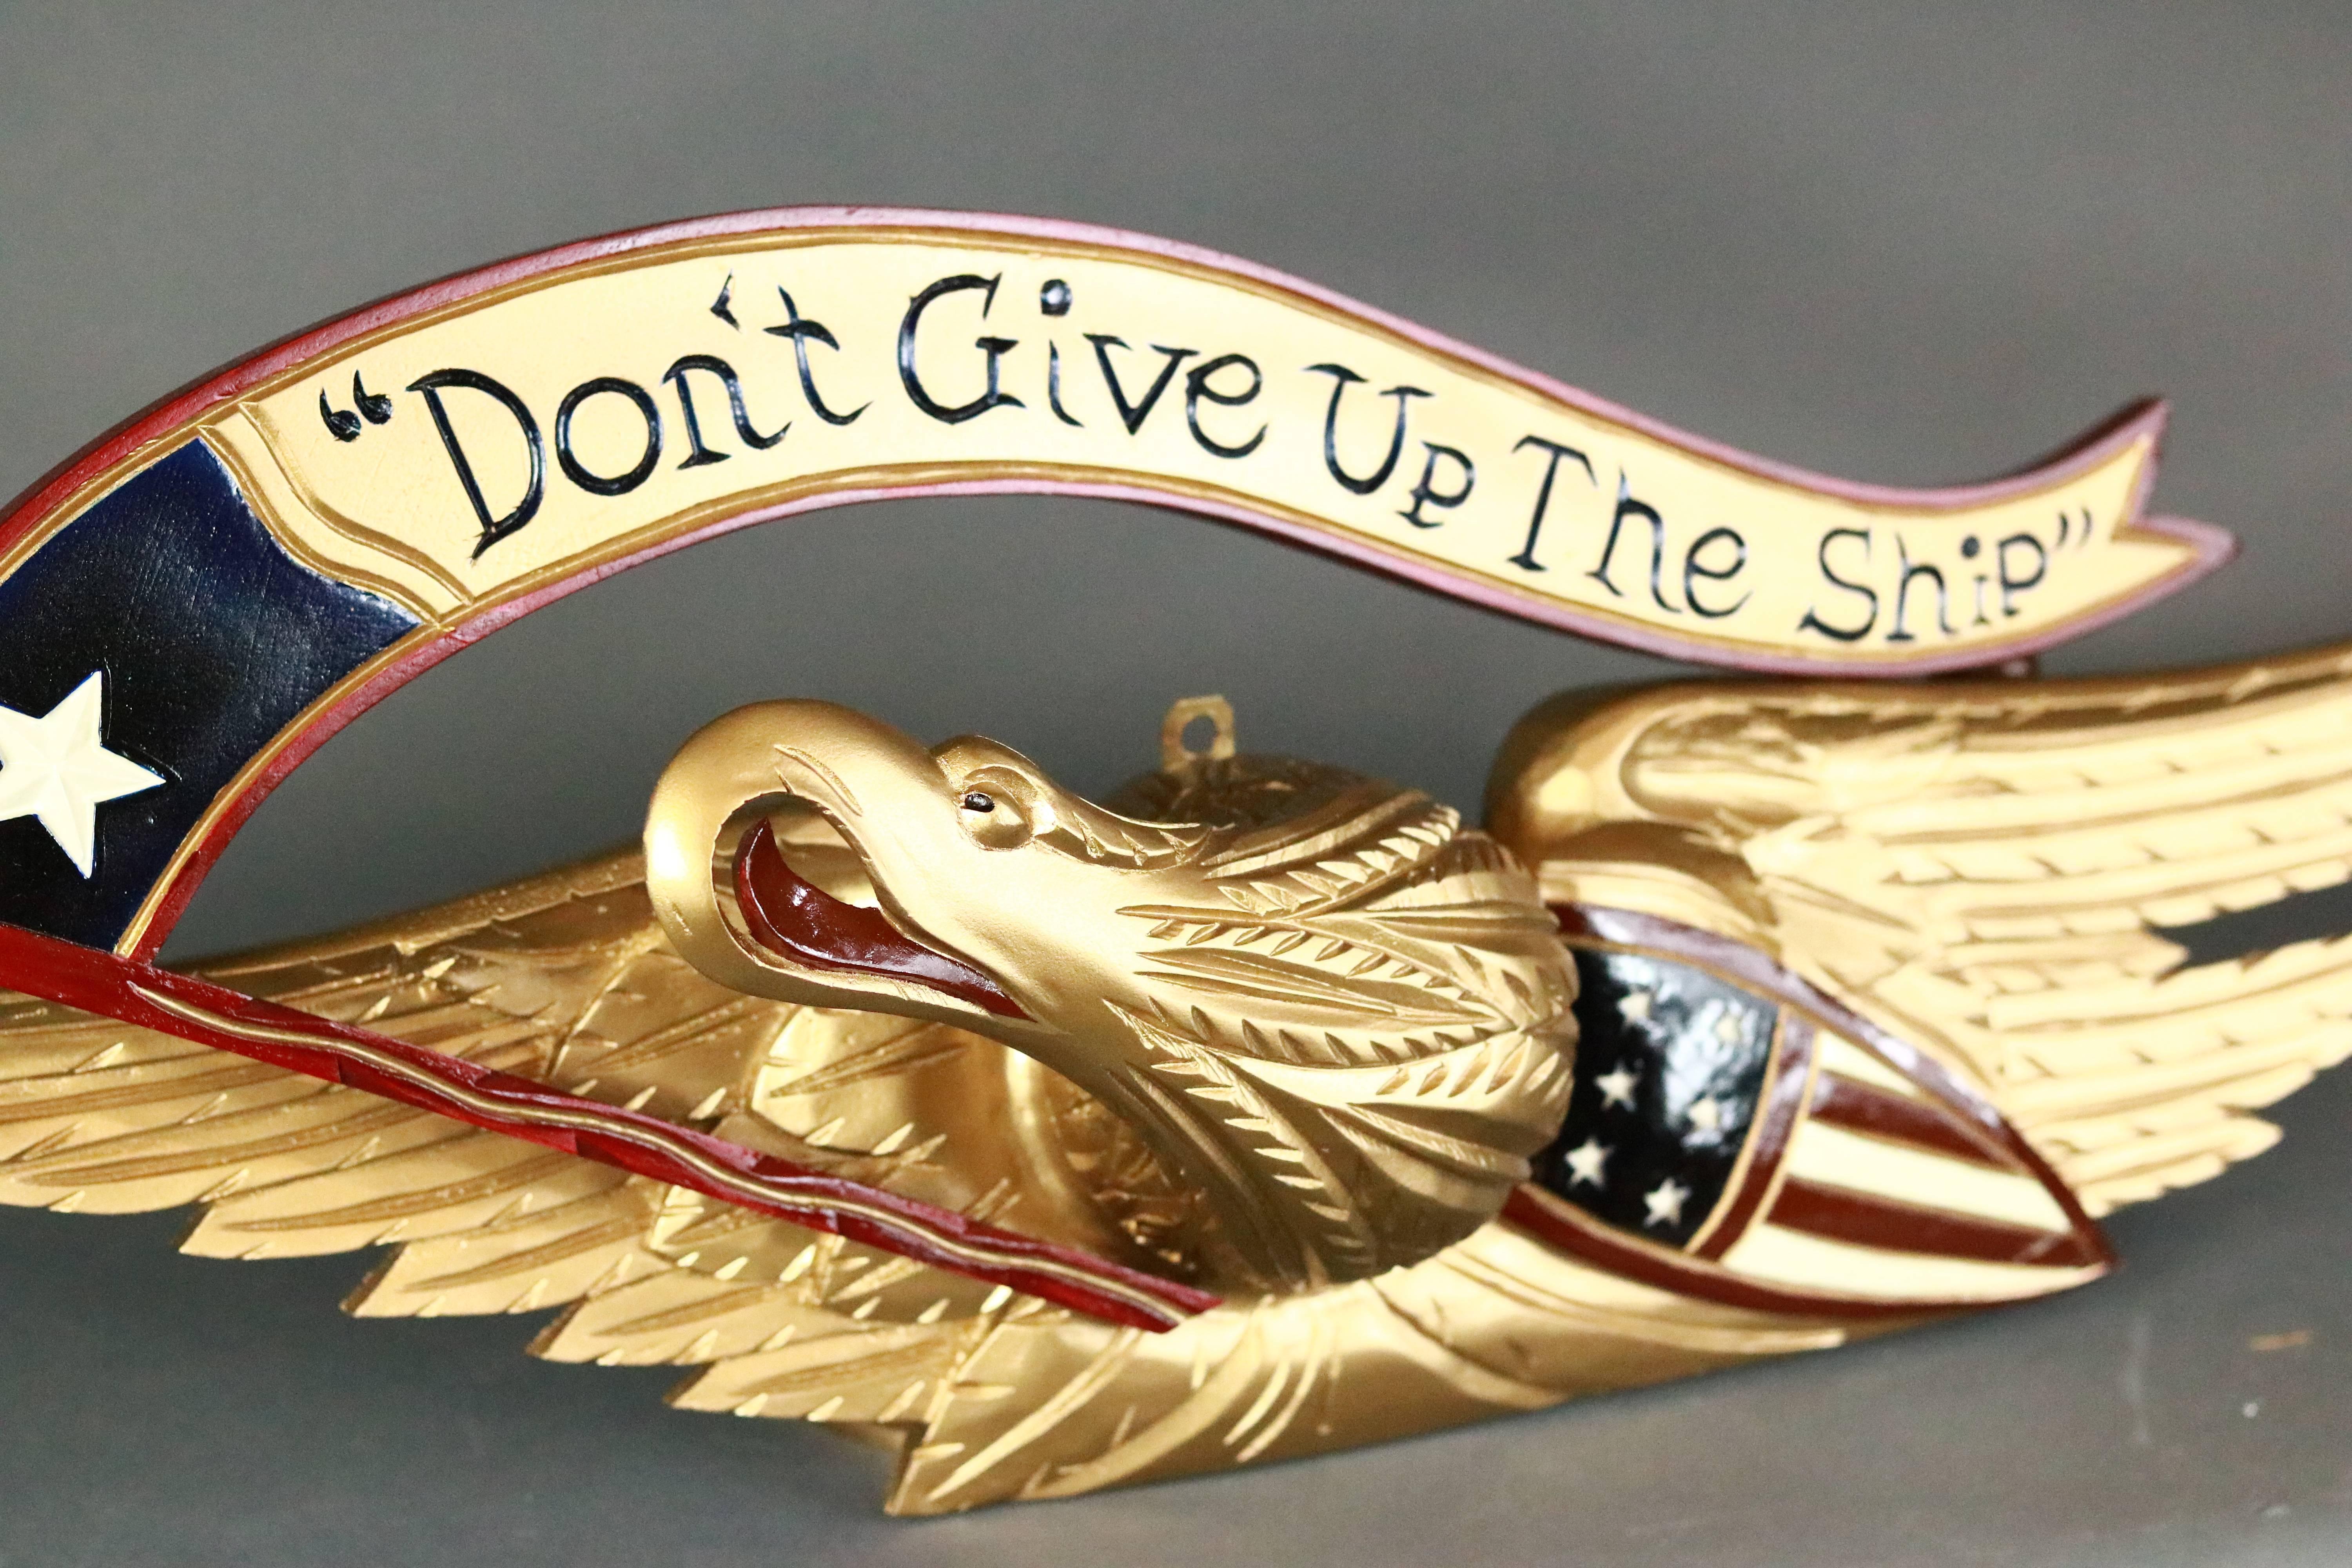 Carved wood eagle with gold finish. The eagle is clothing a banner reading Don’t Give Up The Ship and a red, white and blue patriotic banner.

Measure: approximate 31 x 16 x 7.